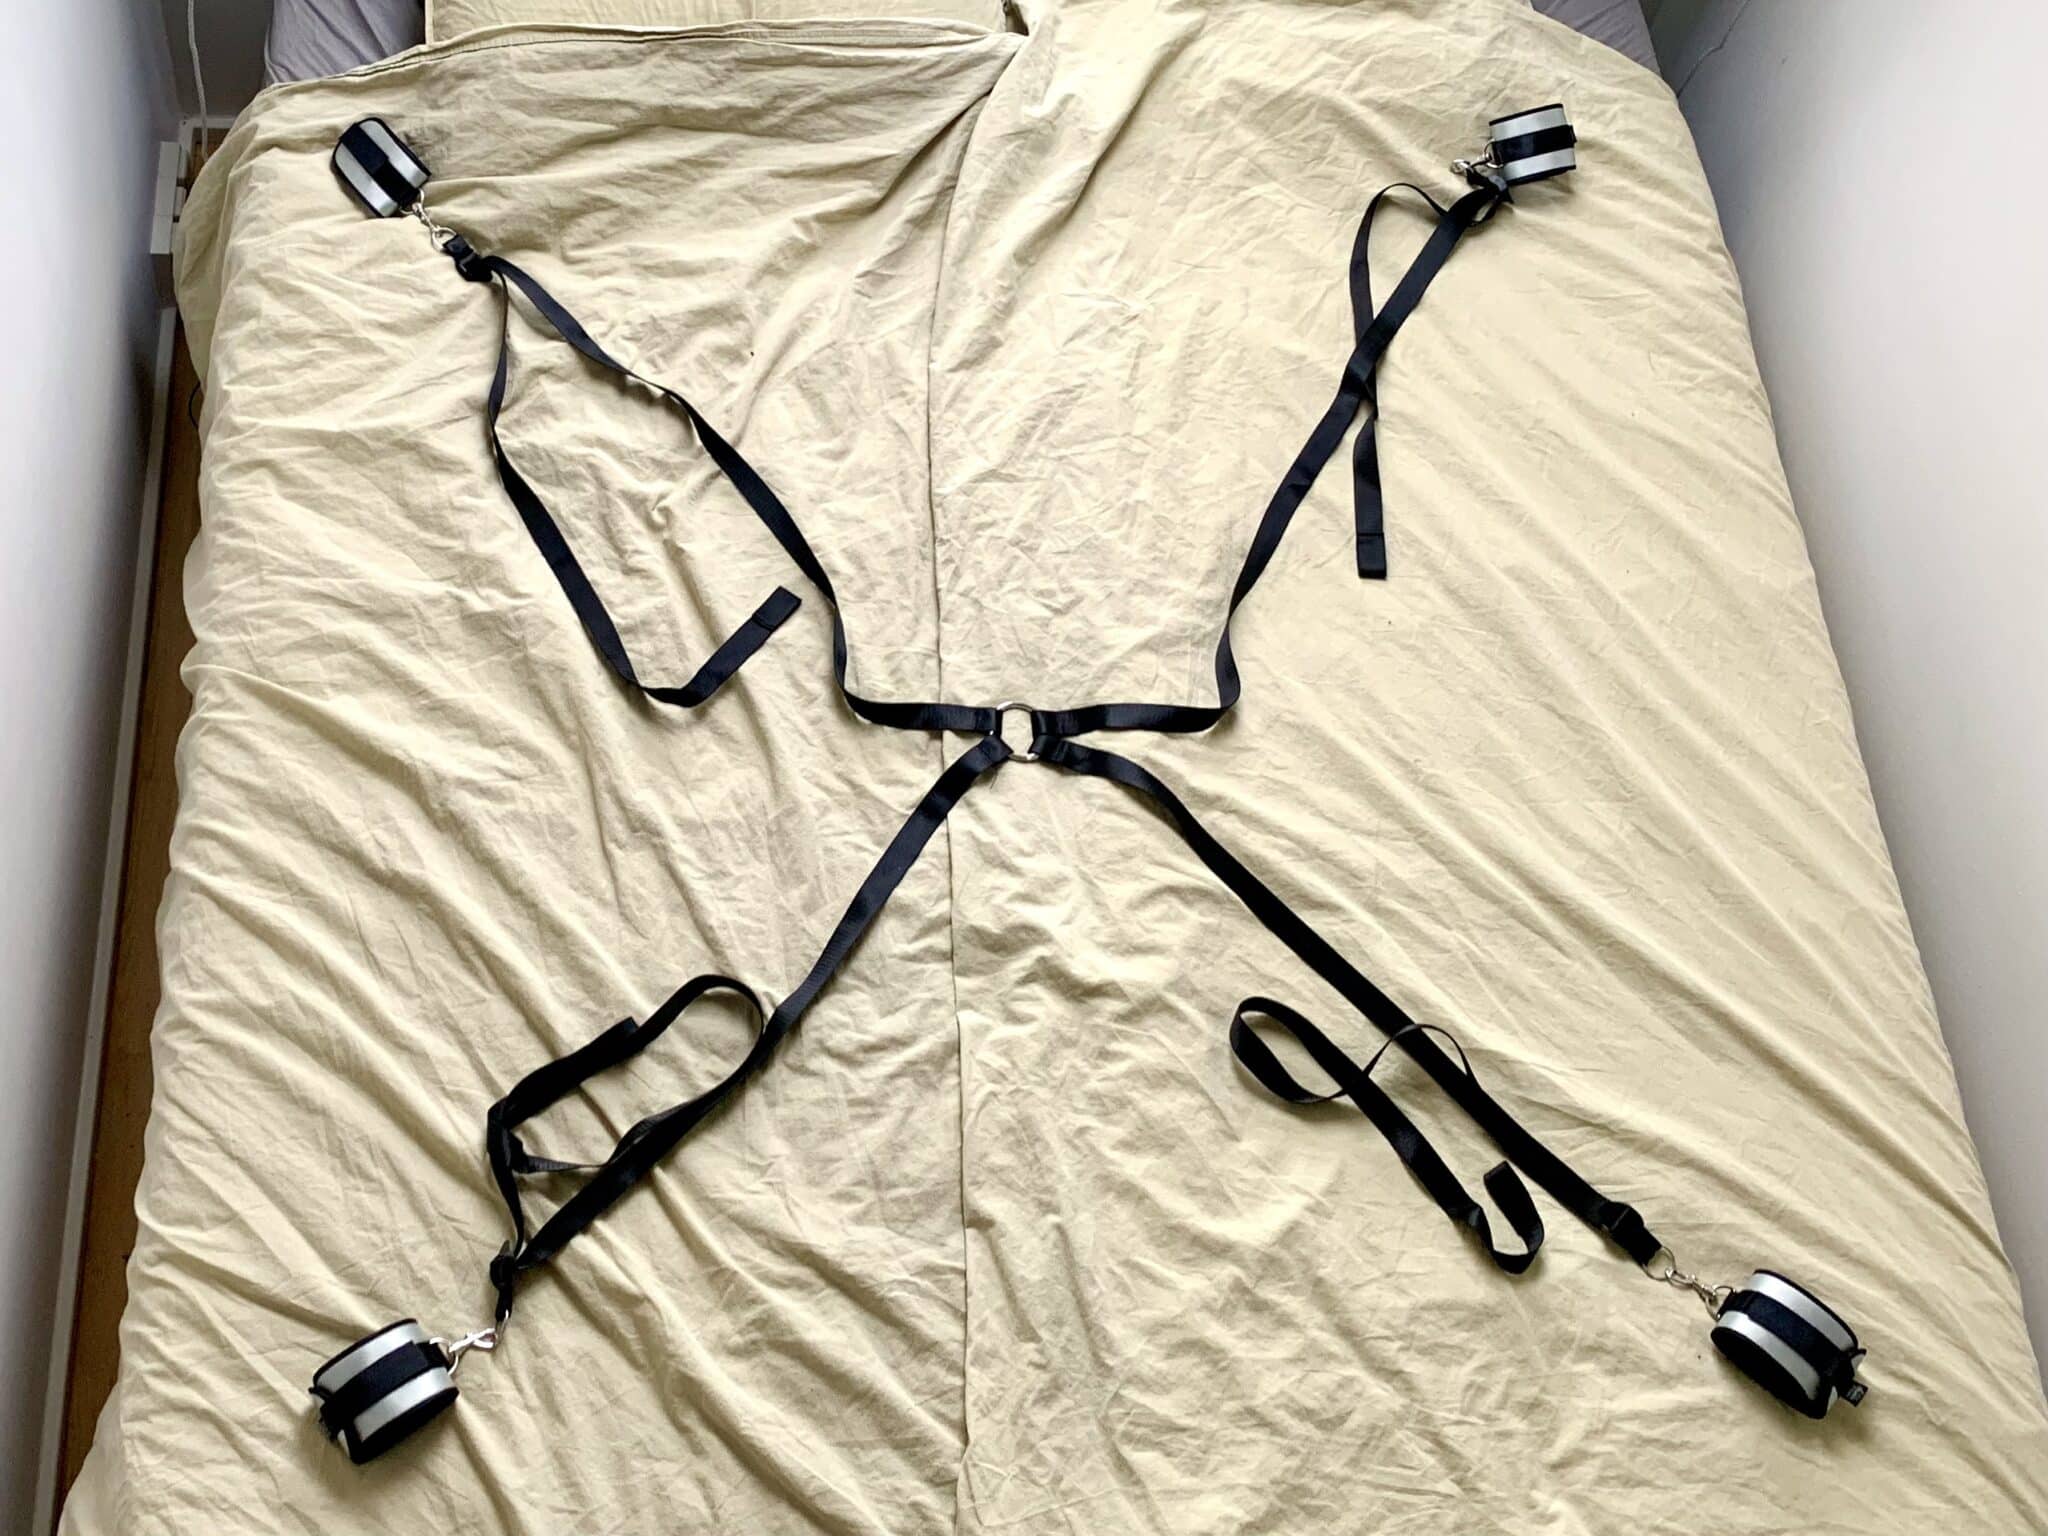 Fifty Shades of Grey Hard Limits Bed Restraint Kit			 			. Slide 4